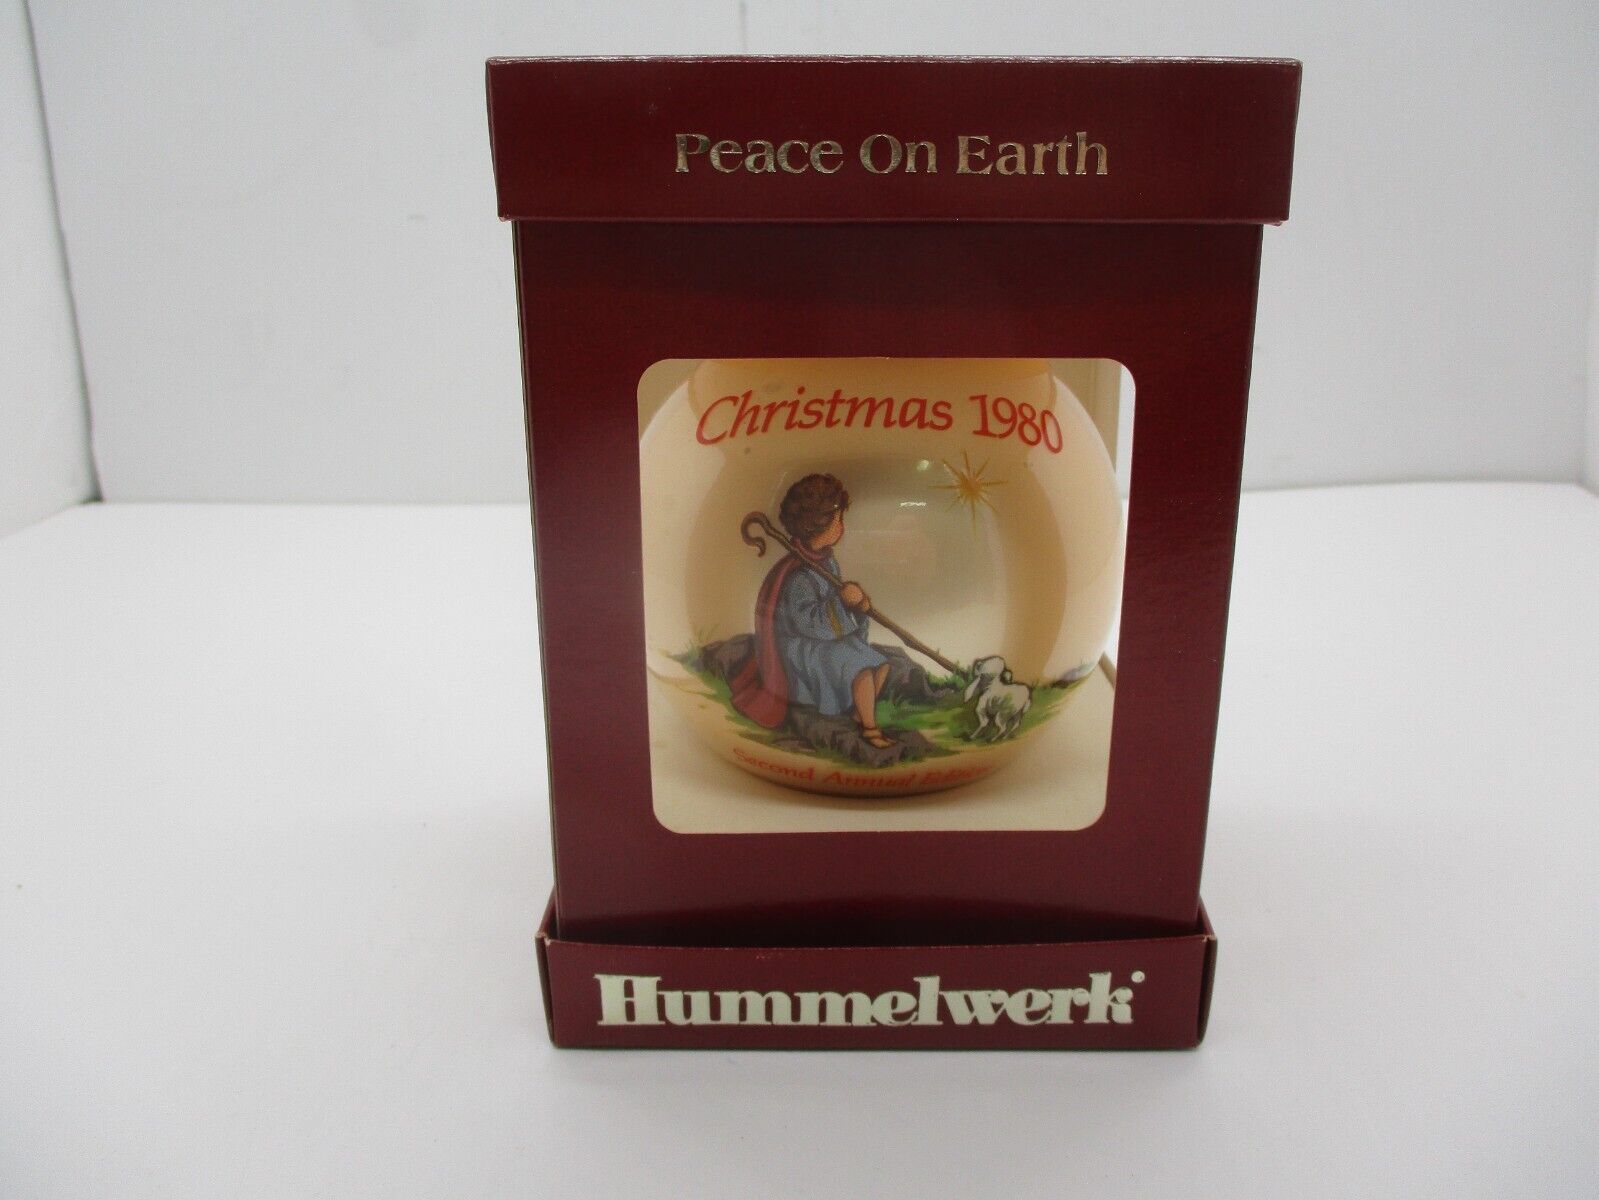 Hummelwerk Glass Christmas Ornament Peace on Earth 2nd Annual Edition 1980 